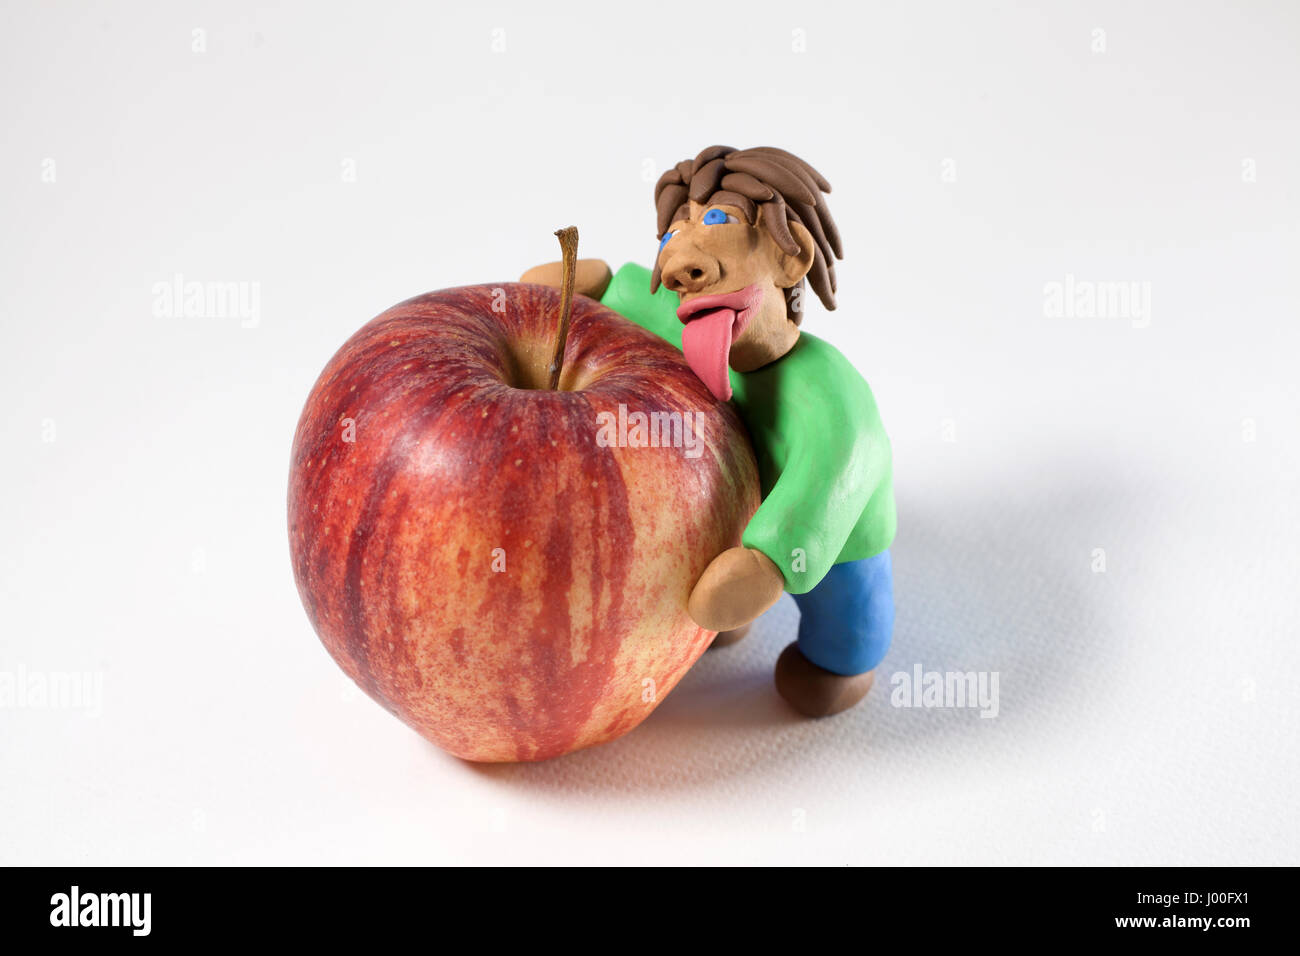 Man made of modelling clay licking and hugging a red apple on a white background Stock Photo